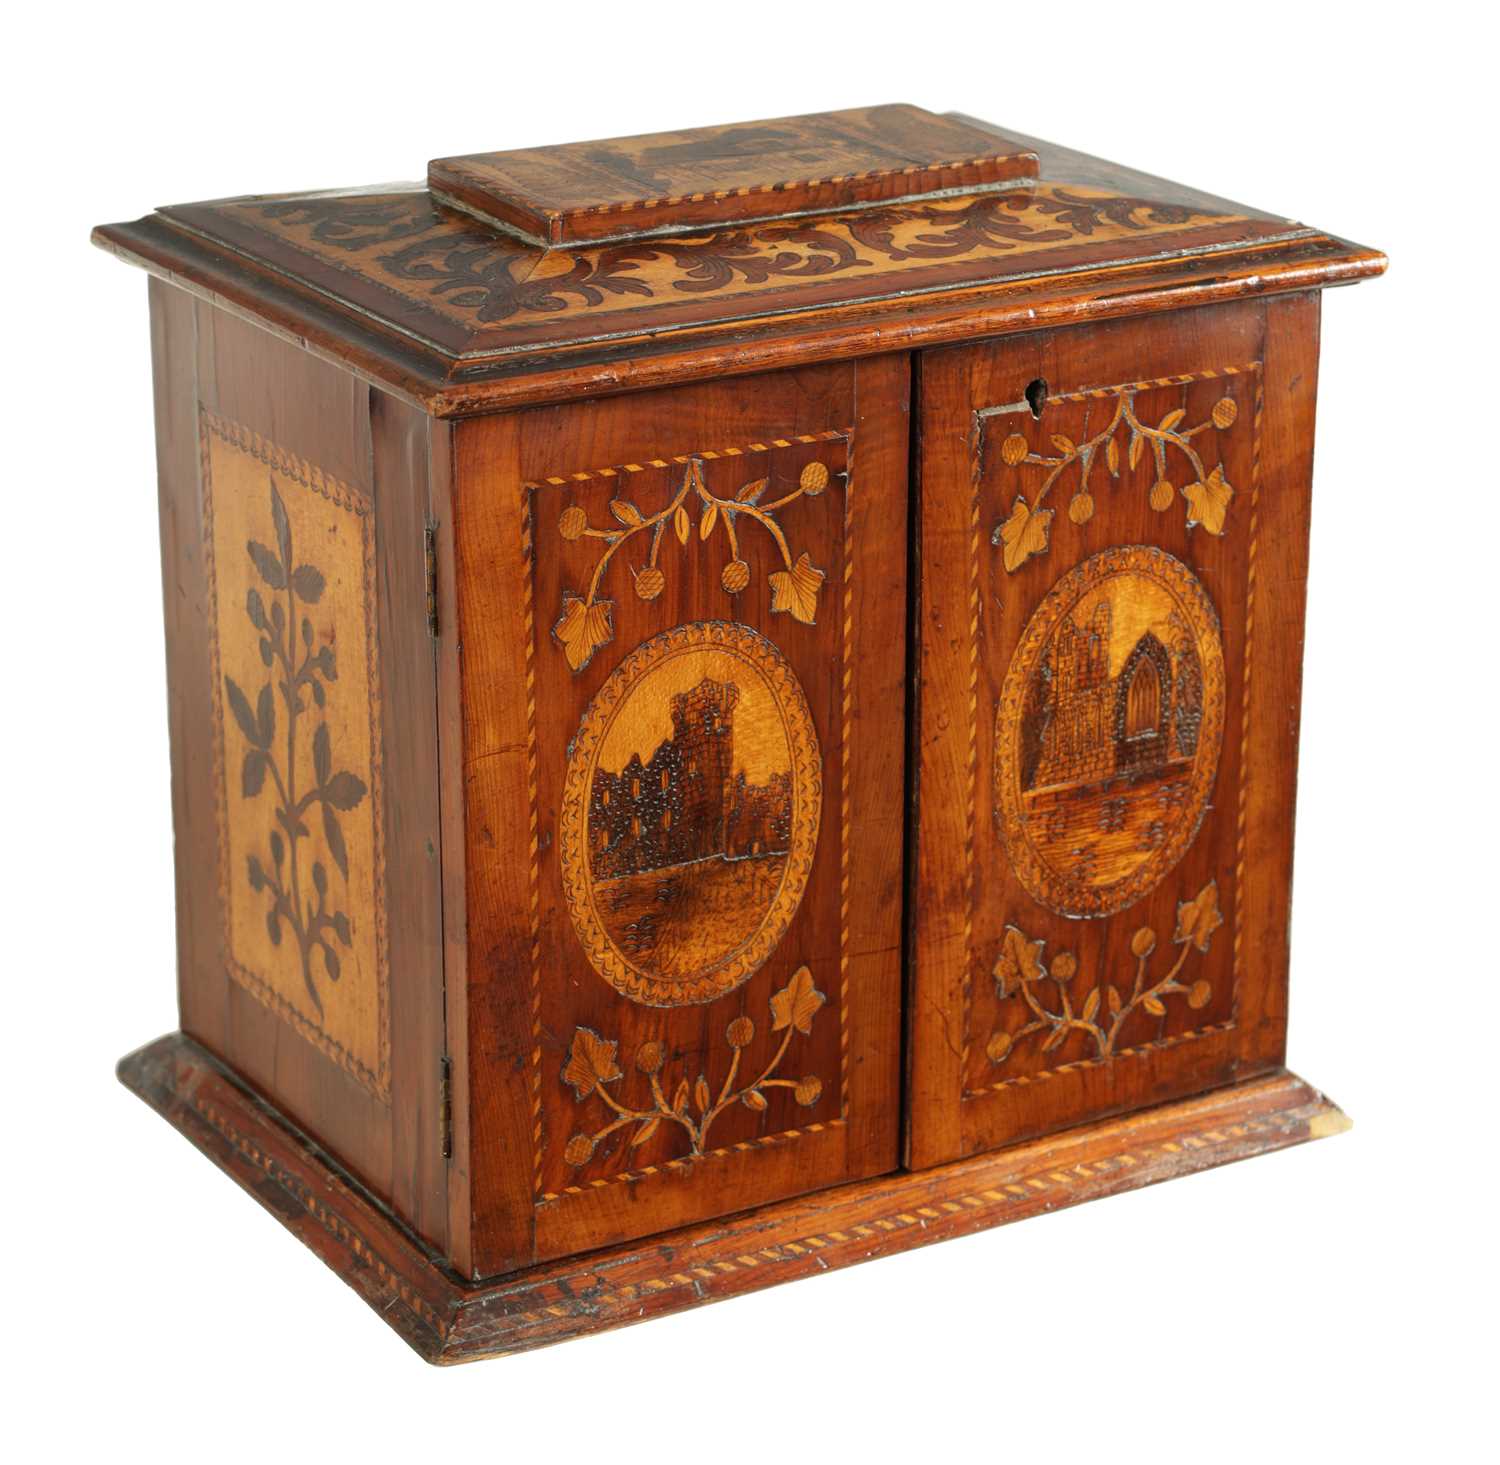 A GOOD 19TH CENTURY KILLARNEY WARE YEW WOOD SEWING CABINET